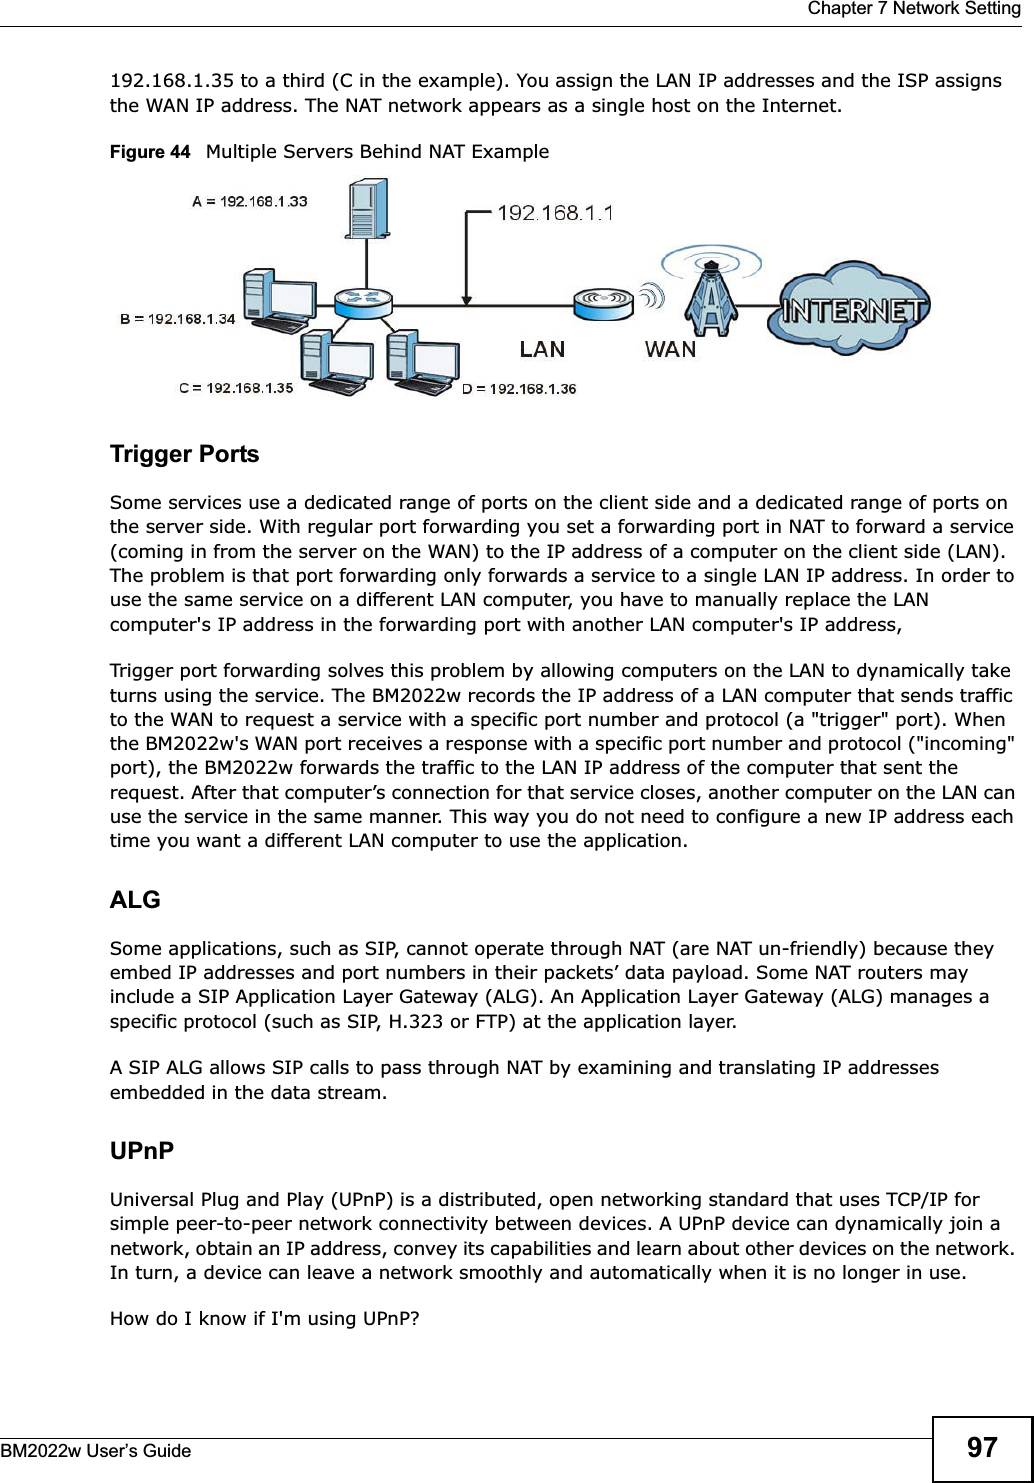  Chapter 7 Network SettingBM2022w User’s Guide 97192.168.1.35 to a third (C in the example). You assign the LAN IP addresses and the ISP assigns the WAN IP address. The NAT network appears as a single host on the Internet.Figure 44   Multiple Servers Behind NAT ExampleTrigger PortsSome services use a dedicated range of ports on the client side and a dedicated range of ports on the server side. With regular port forwarding you set a forwarding port in NAT to forward a service (coming in from the server on the WAN) to the IP address of a computer on the client side (LAN). The problem is that port forwarding only forwards a service to a single LAN IP address. In order to use the same service on a different LAN computer, you have to manually replace the LAN computer&apos;s IP address in the forwarding port with another LAN computer&apos;s IP address, Trigger port forwarding solves this problem by allowing computers on the LAN to dynamically take turns using the service. The BM2022w records the IP address of a LAN computer that sends traffic to the WAN to request a service with a specific port number and protocol (a &quot;trigger&quot; port). When the BM2022w&apos;s WAN port receives a response with a specific port number and protocol (&quot;incoming&quot; port), the BM2022w forwards the traffic to the LAN IP address of the computer that sent the request. After that computer’s connection for that service closes, another computer on the LAN can use the service in the same manner. This way you do not need to configure a new IP address each time you want a different LAN computer to use the application.ALGSome applications, such as SIP, cannot operate through NAT (are NAT un-friendly) because they embed IP addresses and port numbers in their packets’ data payload. Some NAT routers may include a SIP Application Layer Gateway (ALG). An Application Layer Gateway (ALG) manages a specific protocol (such as SIP, H.323 or FTP) at the application layer. A SIP ALG allows SIP calls to pass through NAT by examining and translating IP addresses embedded in the data stream.UPnPUniversal Plug and Play (UPnP) is a distributed, open networking standard that uses TCP/IP for simple peer-to-peer network connectivity between devices. A UPnP device can dynamically join a network, obtain an IP address, convey its capabilities and learn about other devices on the network. In turn, a device can leave a network smoothly and automatically when it is no longer in use.How do I know if I&apos;m using UPnP? 